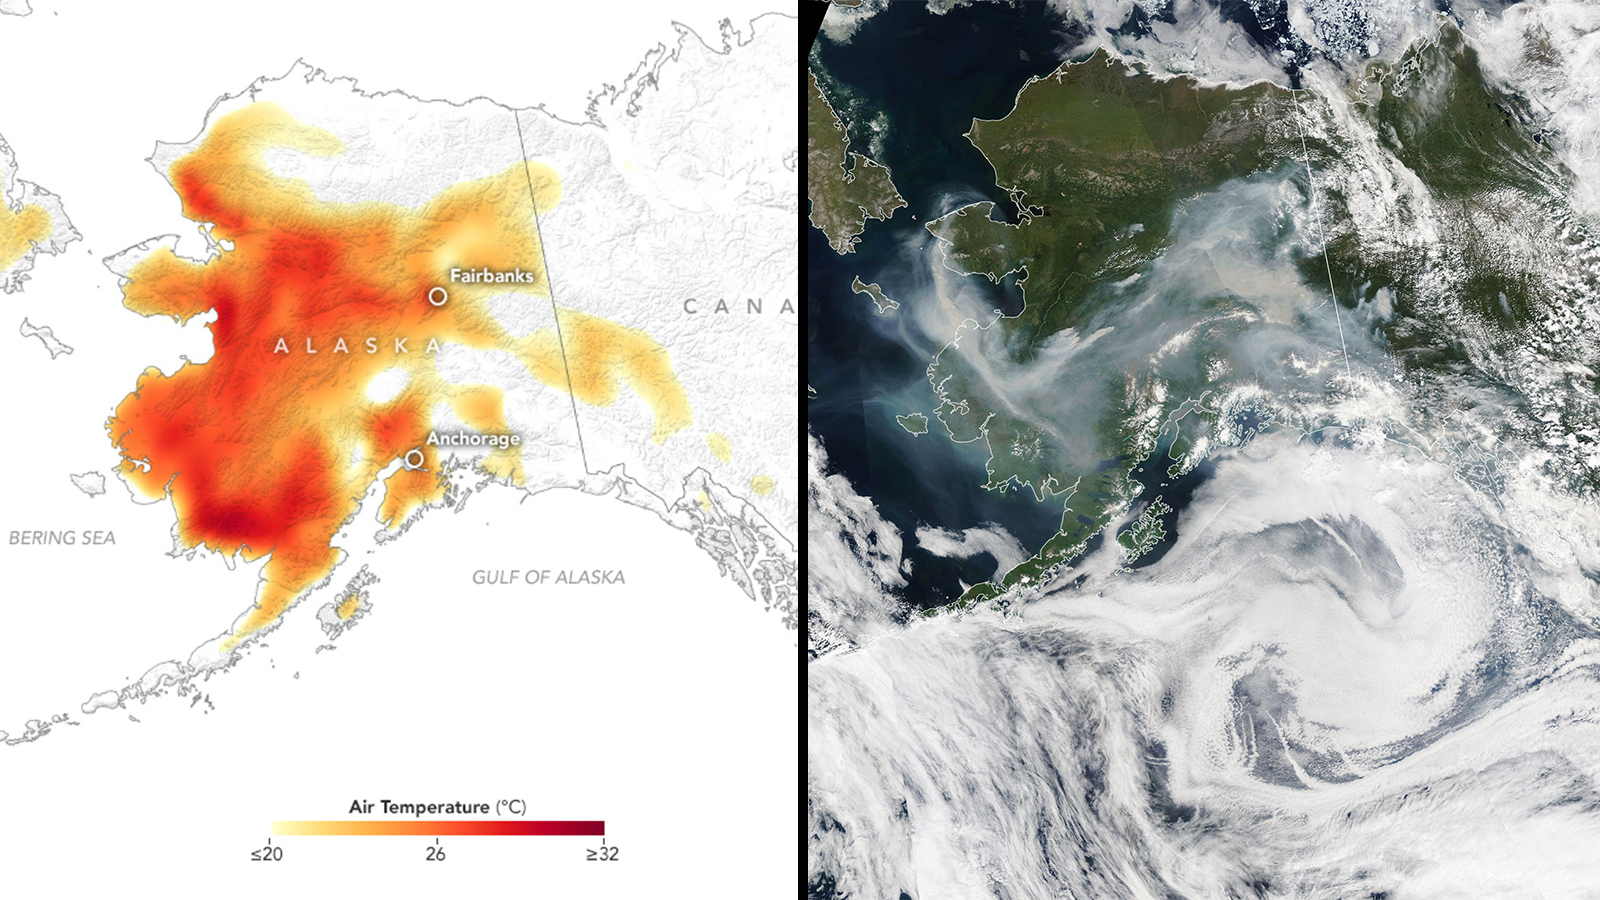 Side-by-side images showing red areas throughout Alaska representing hotter than usual temperatures and a satellite image showing smoke and clouds coming from the same areas